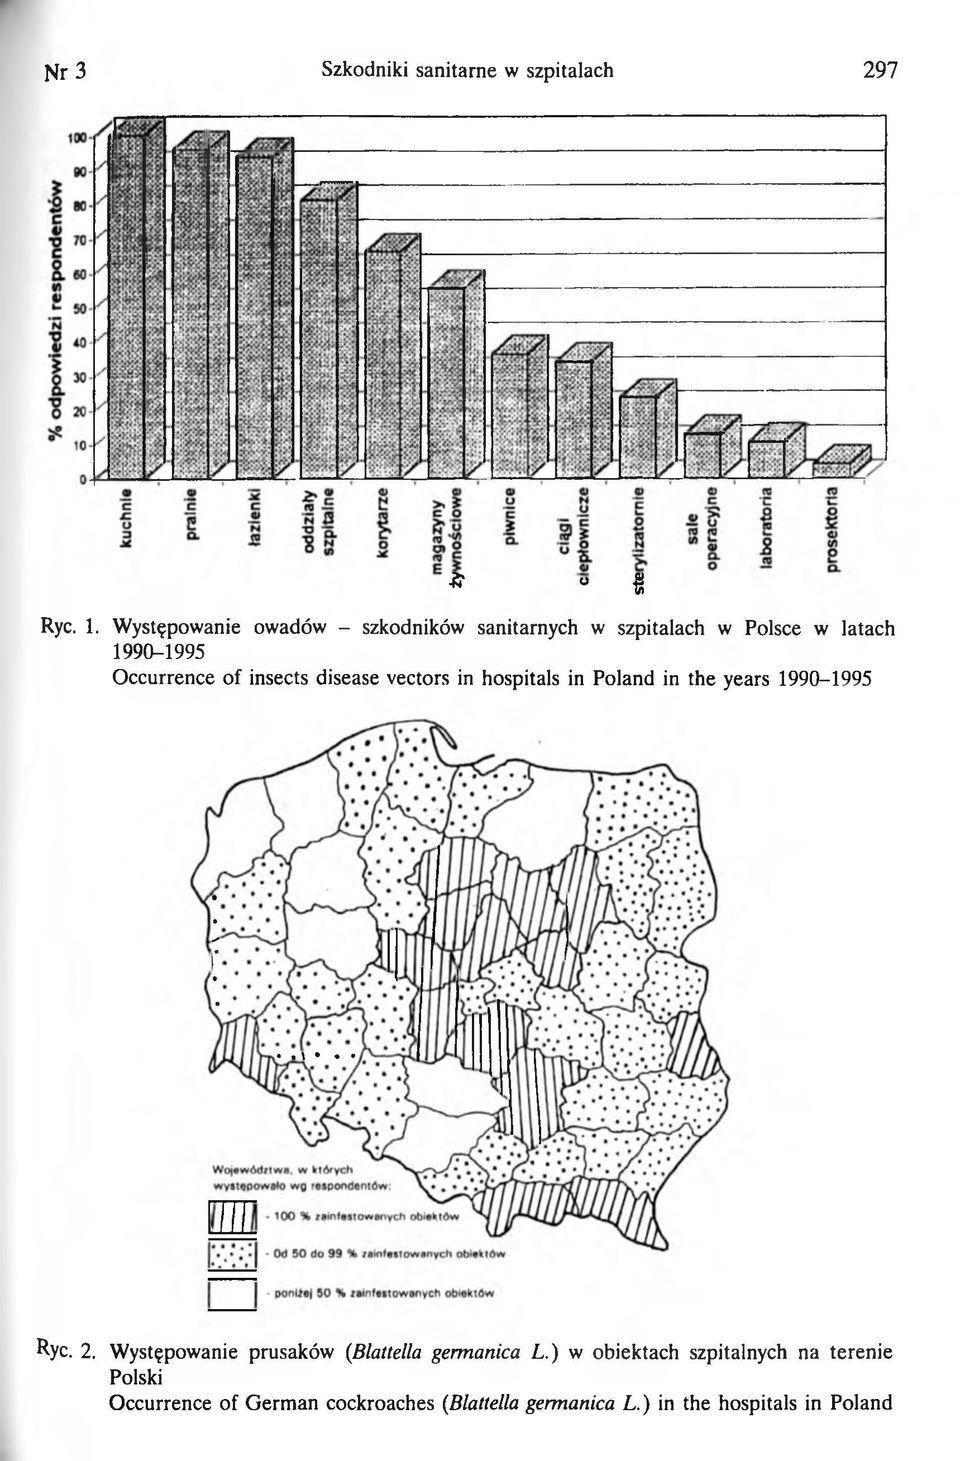 insects disease vectors in hospitals in Poland in the years 1990-1995 %c. 2.